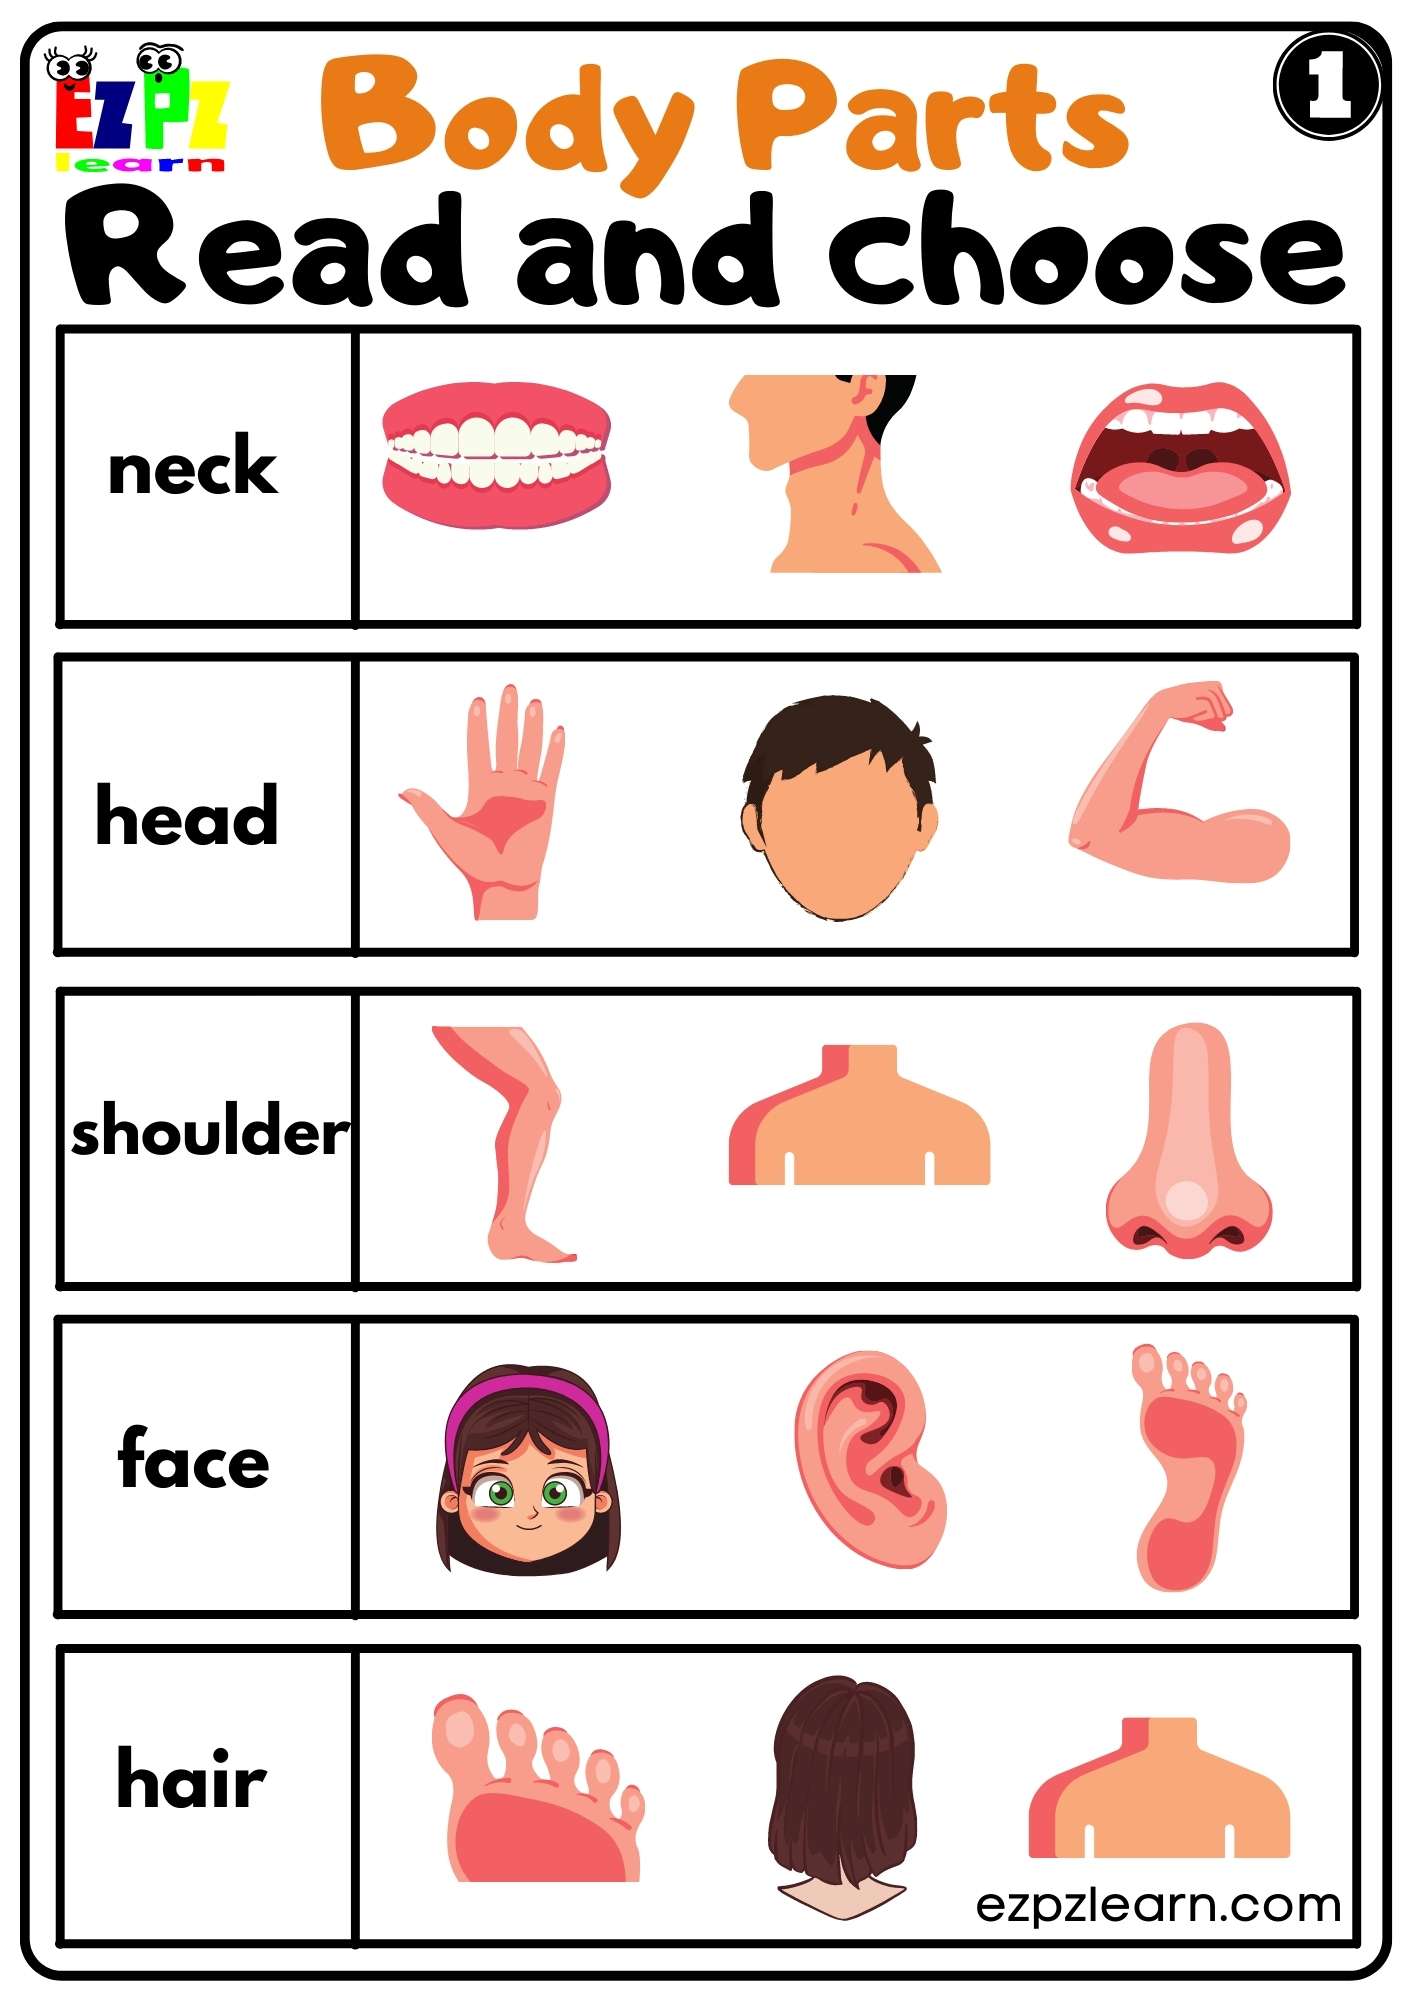 body-parts-read-and-choose-worksheets-for-kids-and-esl-pdf-download-set